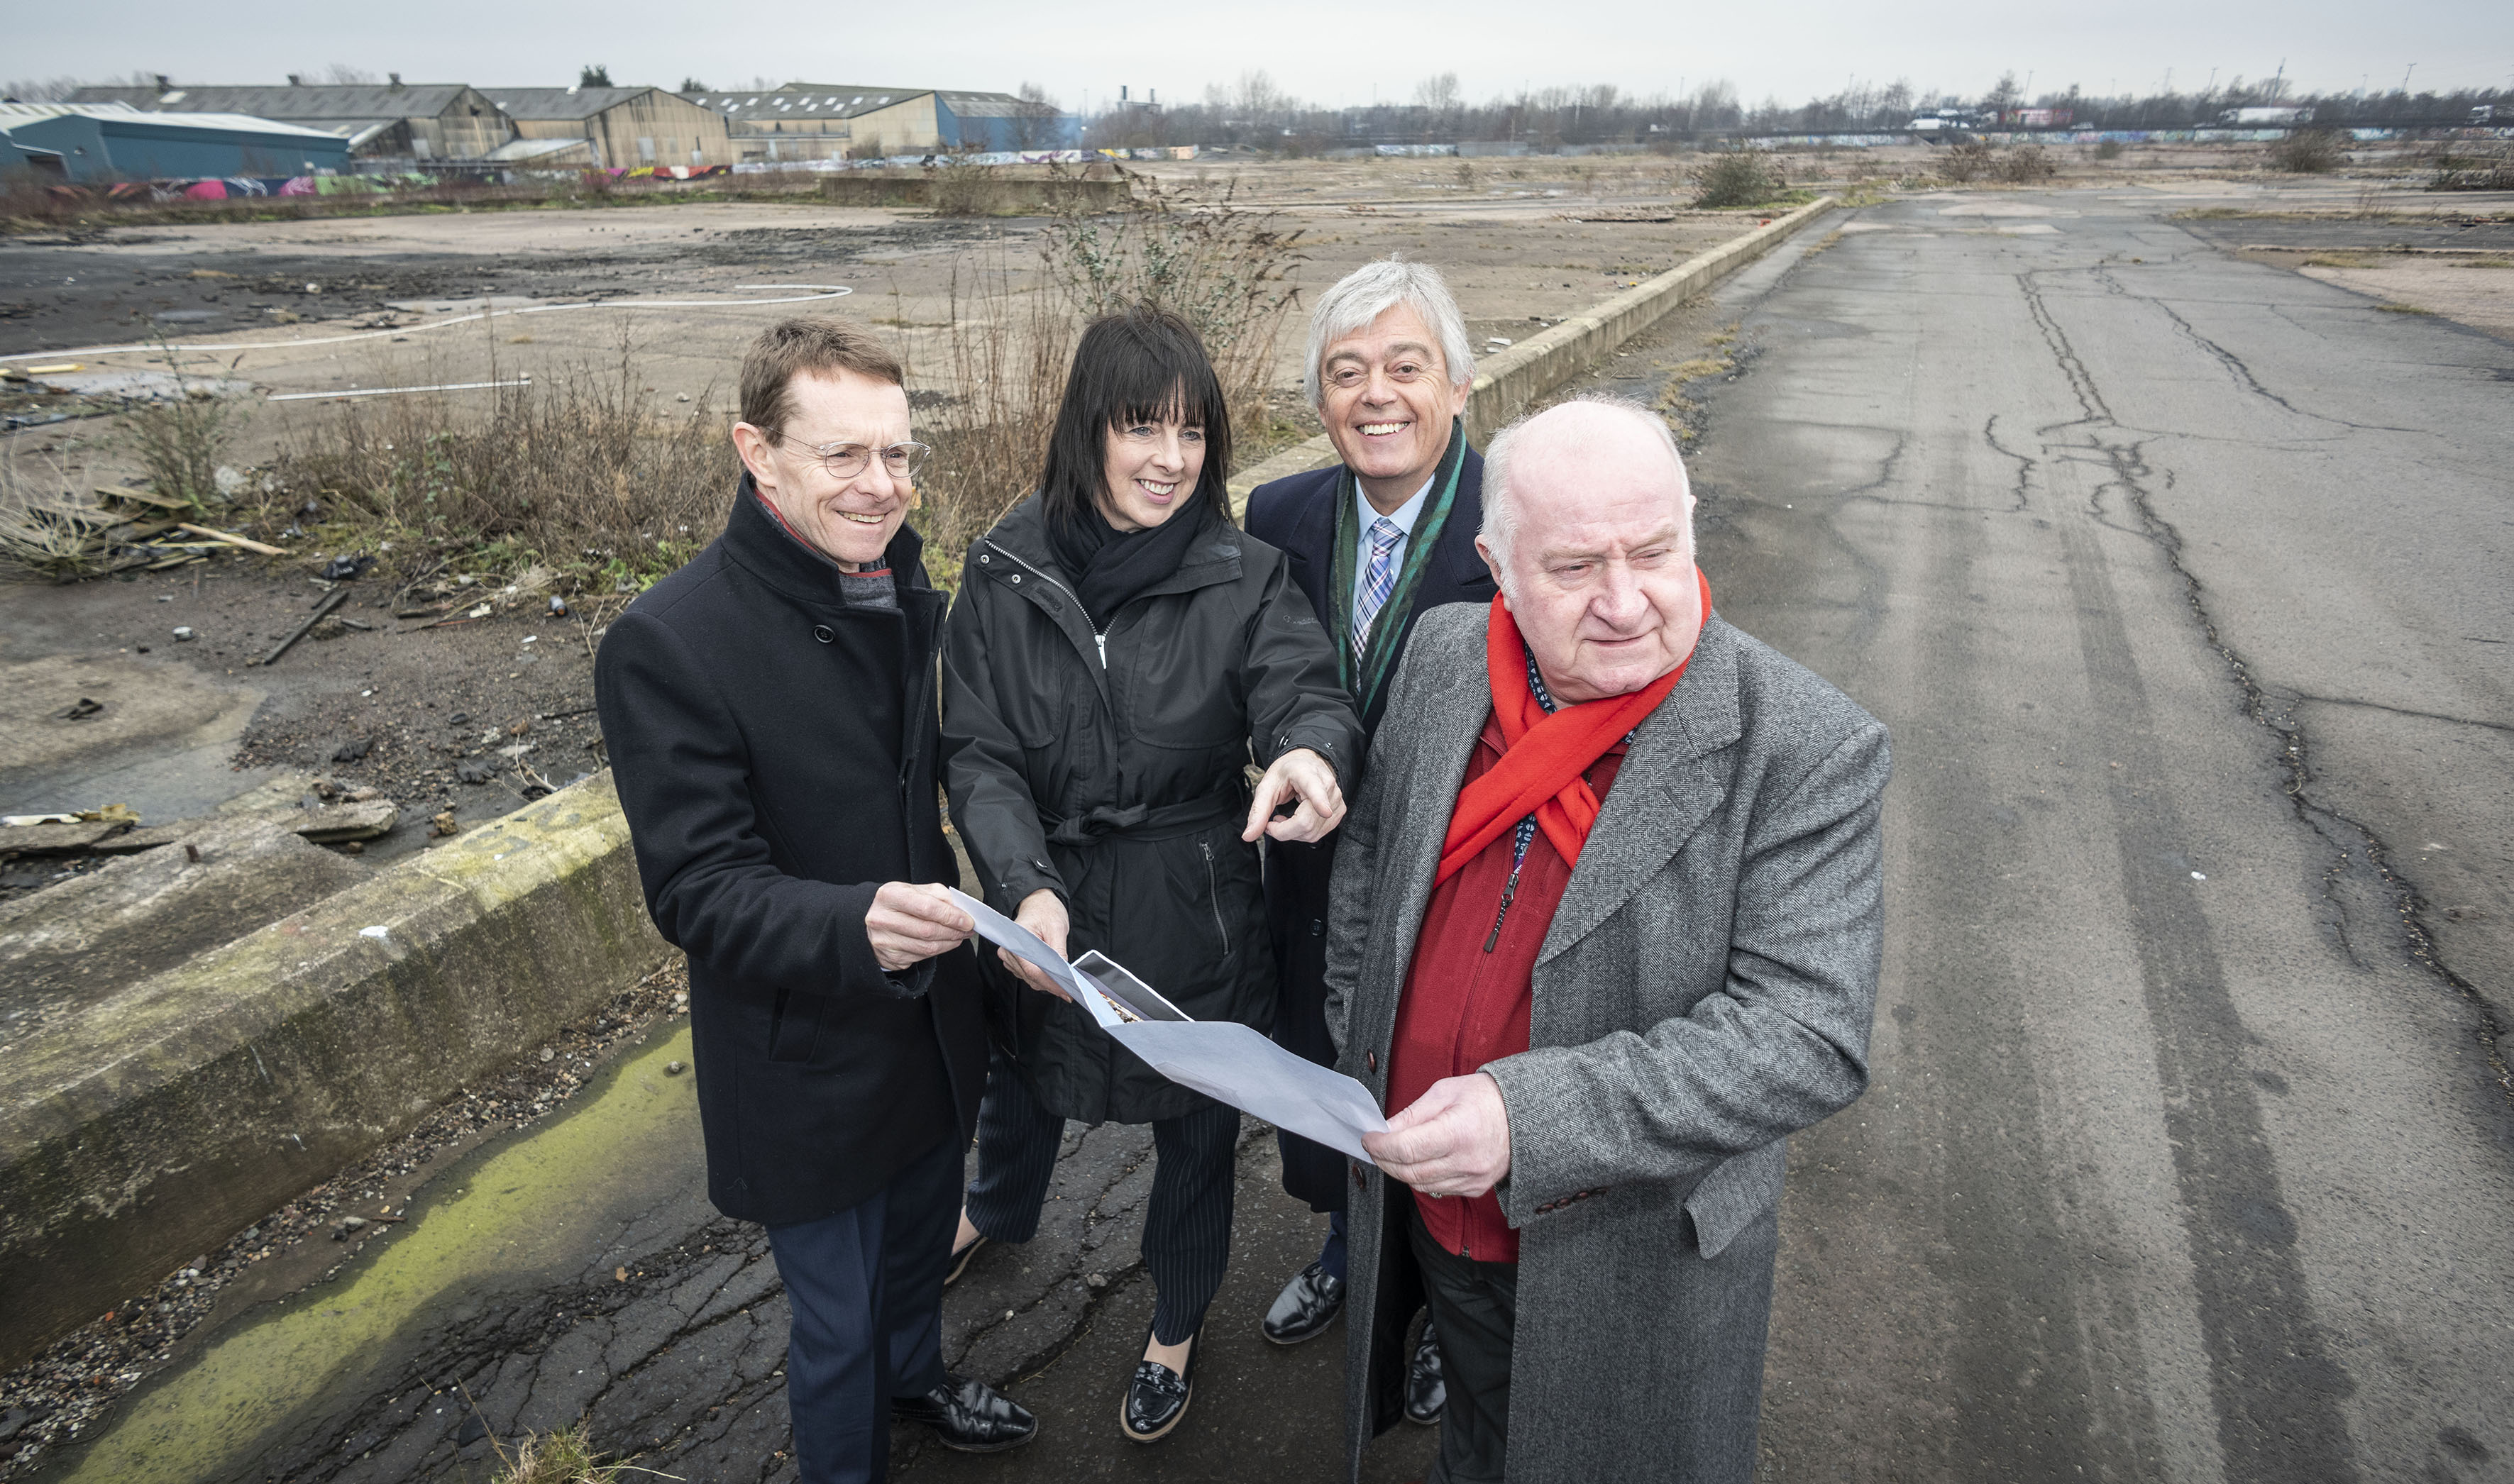 Mayor of the West Midlands Andy Street, Vivienne Clements, director at Henry Boot Developments, Tom Westley, board member Black Country LEP and Cllr Mike Bird, leader of Walsall Council and WMCA portfolio holder for land and housing, take a tour of the Phoenix 10 site